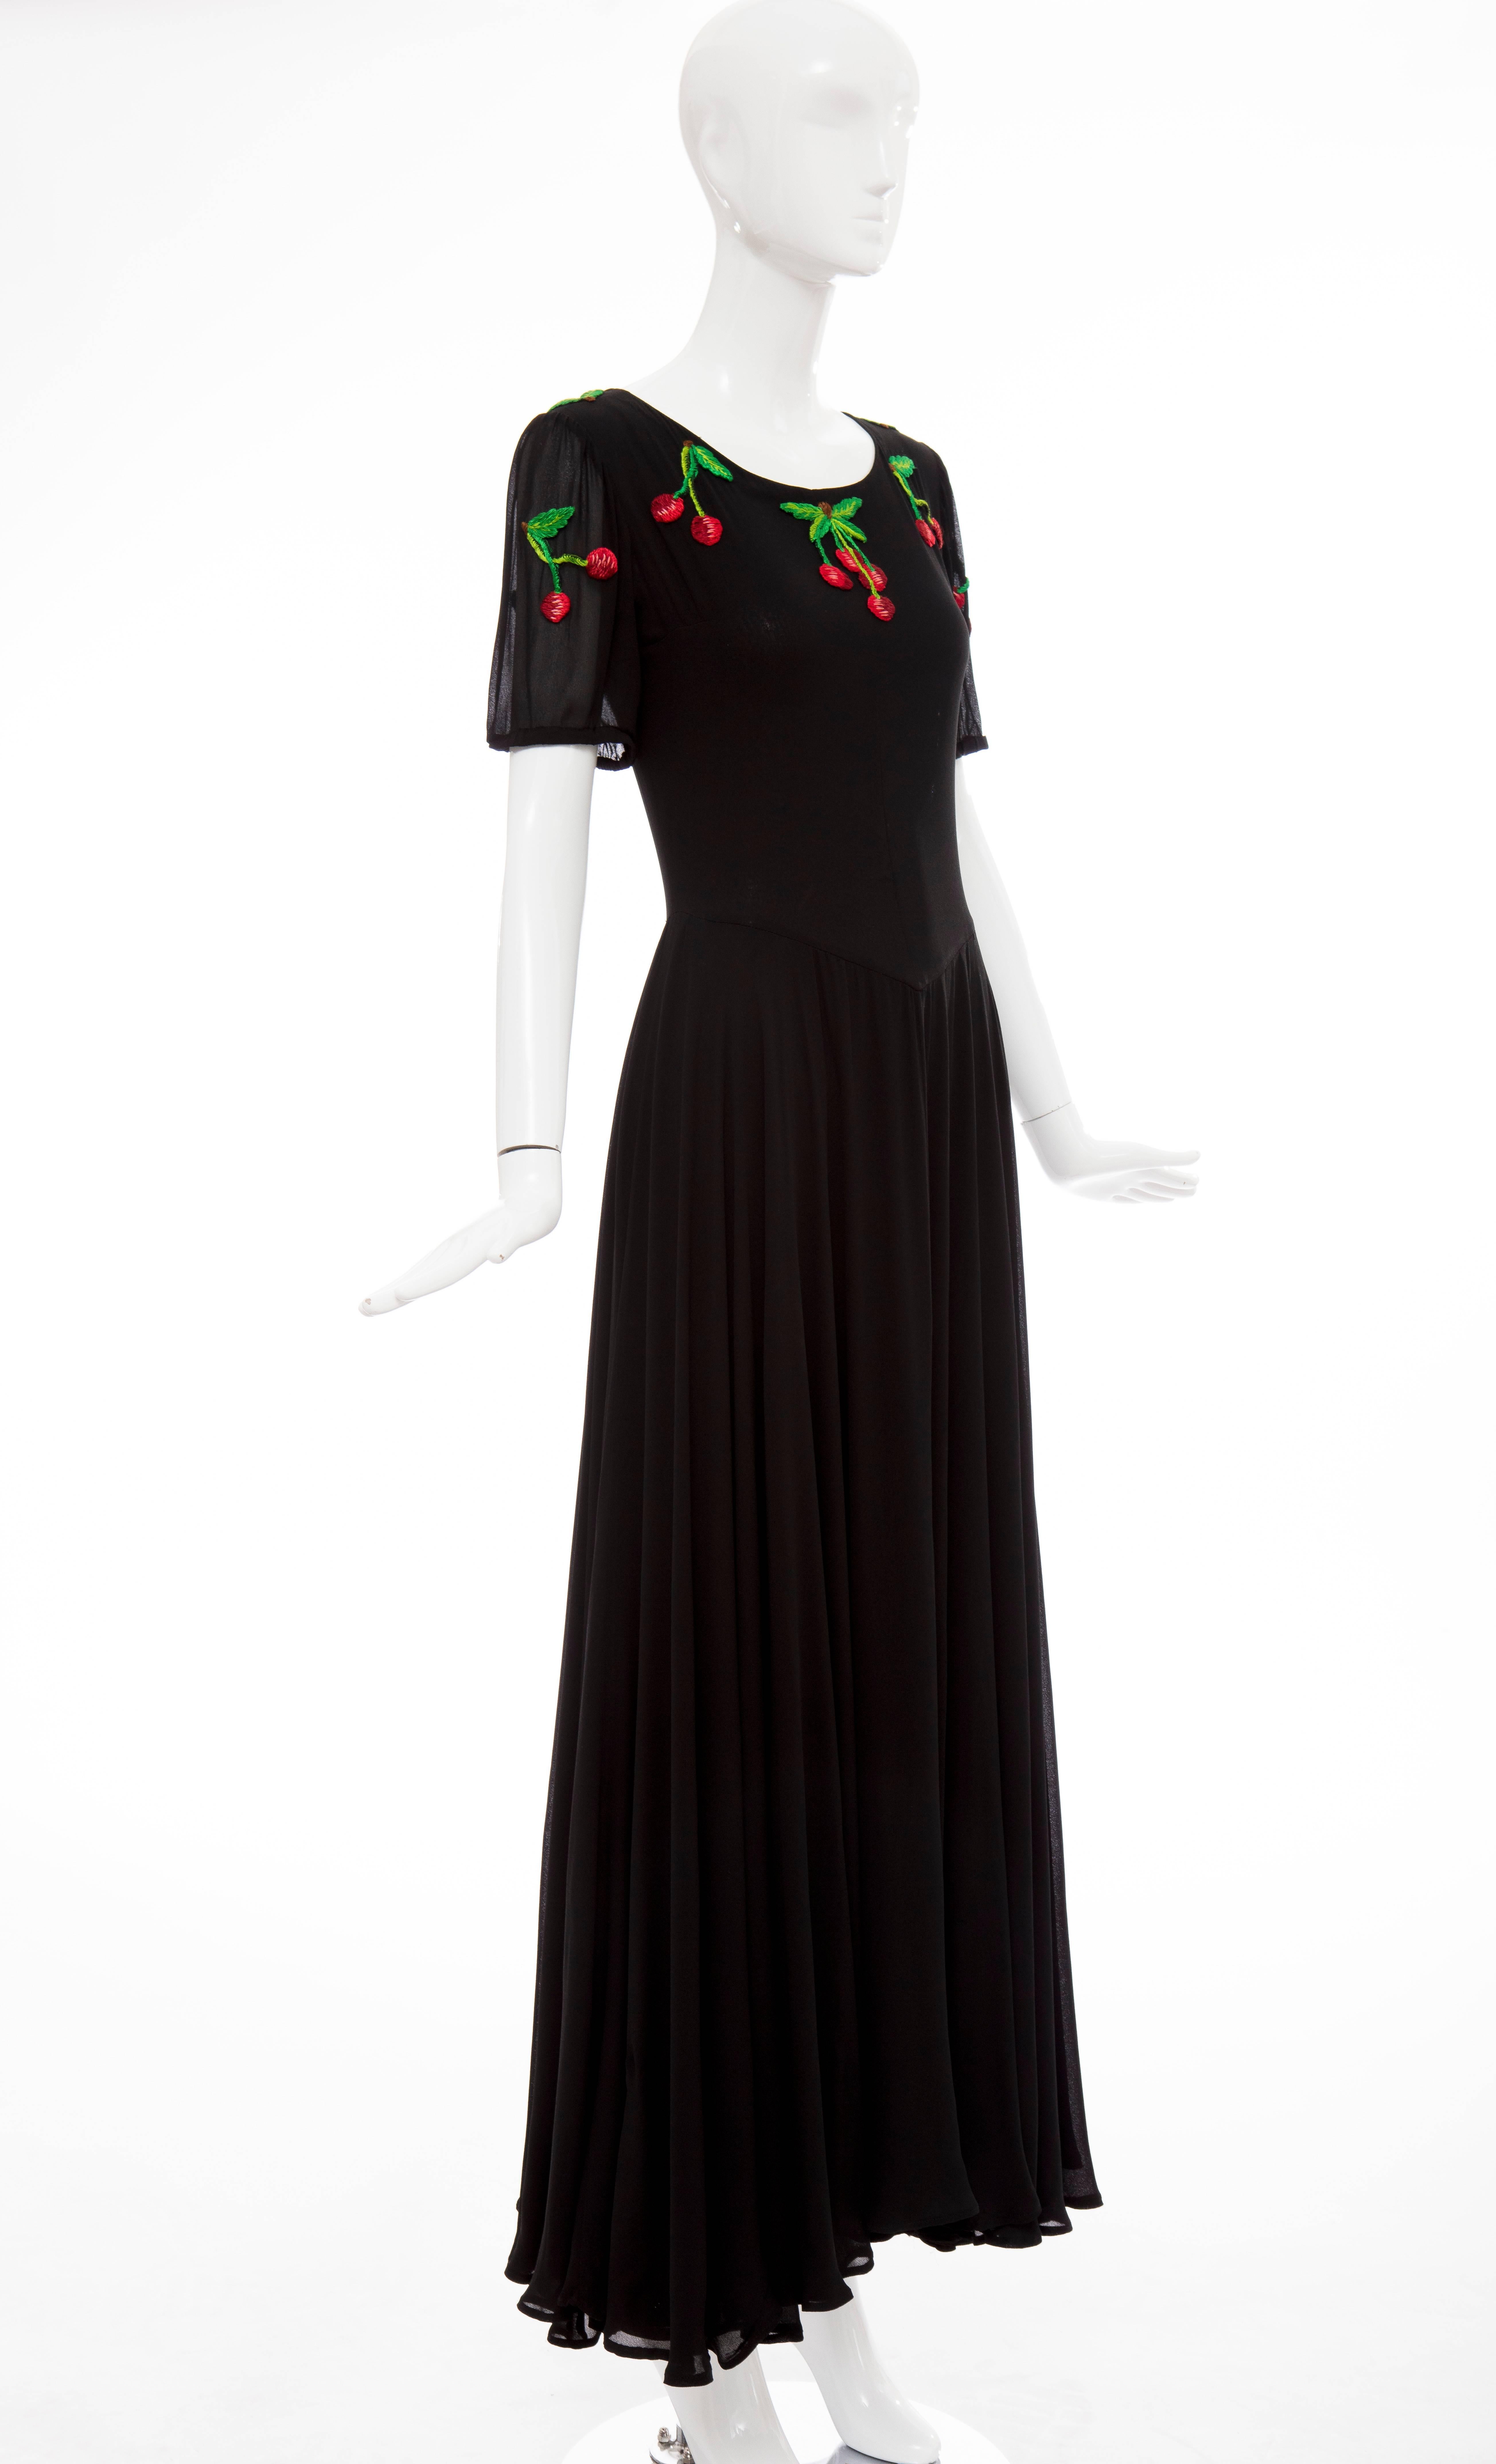 Women's Valentino Black Crepe Evening Dress With Hand Embroidered Cherries, Circa 1970's